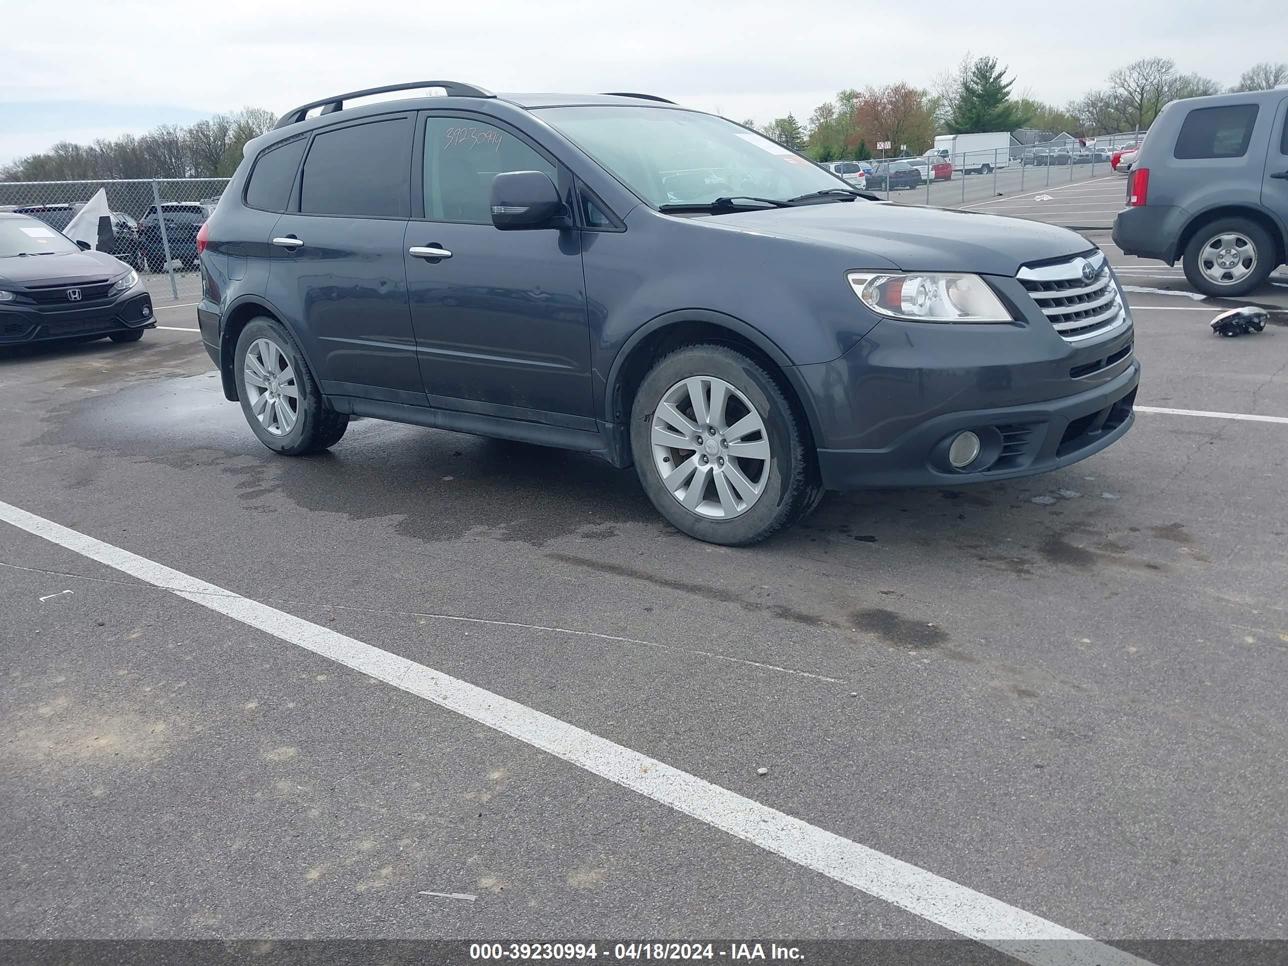 vin: 4S4WX90D384416704 4S4WX90D384416704 2008 subaru tribeca 3600 for Sale in 46806, 4300 Oxford St., Fort Wayne, Indiana, USA